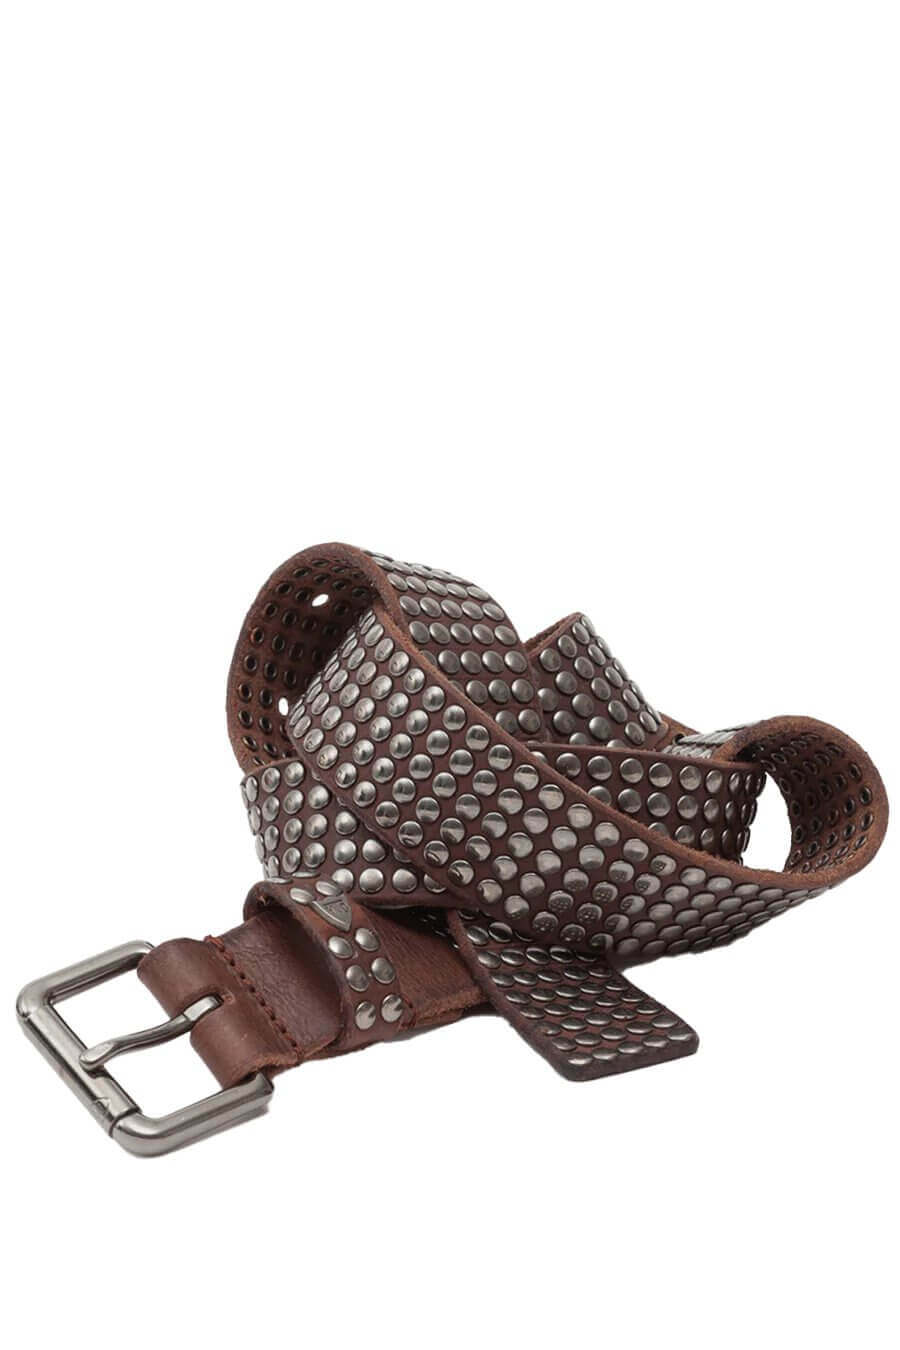 5.000 STUDS BELT Brown leather belt with studs, brass buckle, studded zamac belt loop with HTC logo rivet. Height: 3.5 cm. Made in Italy. HTC LOS ANGELES